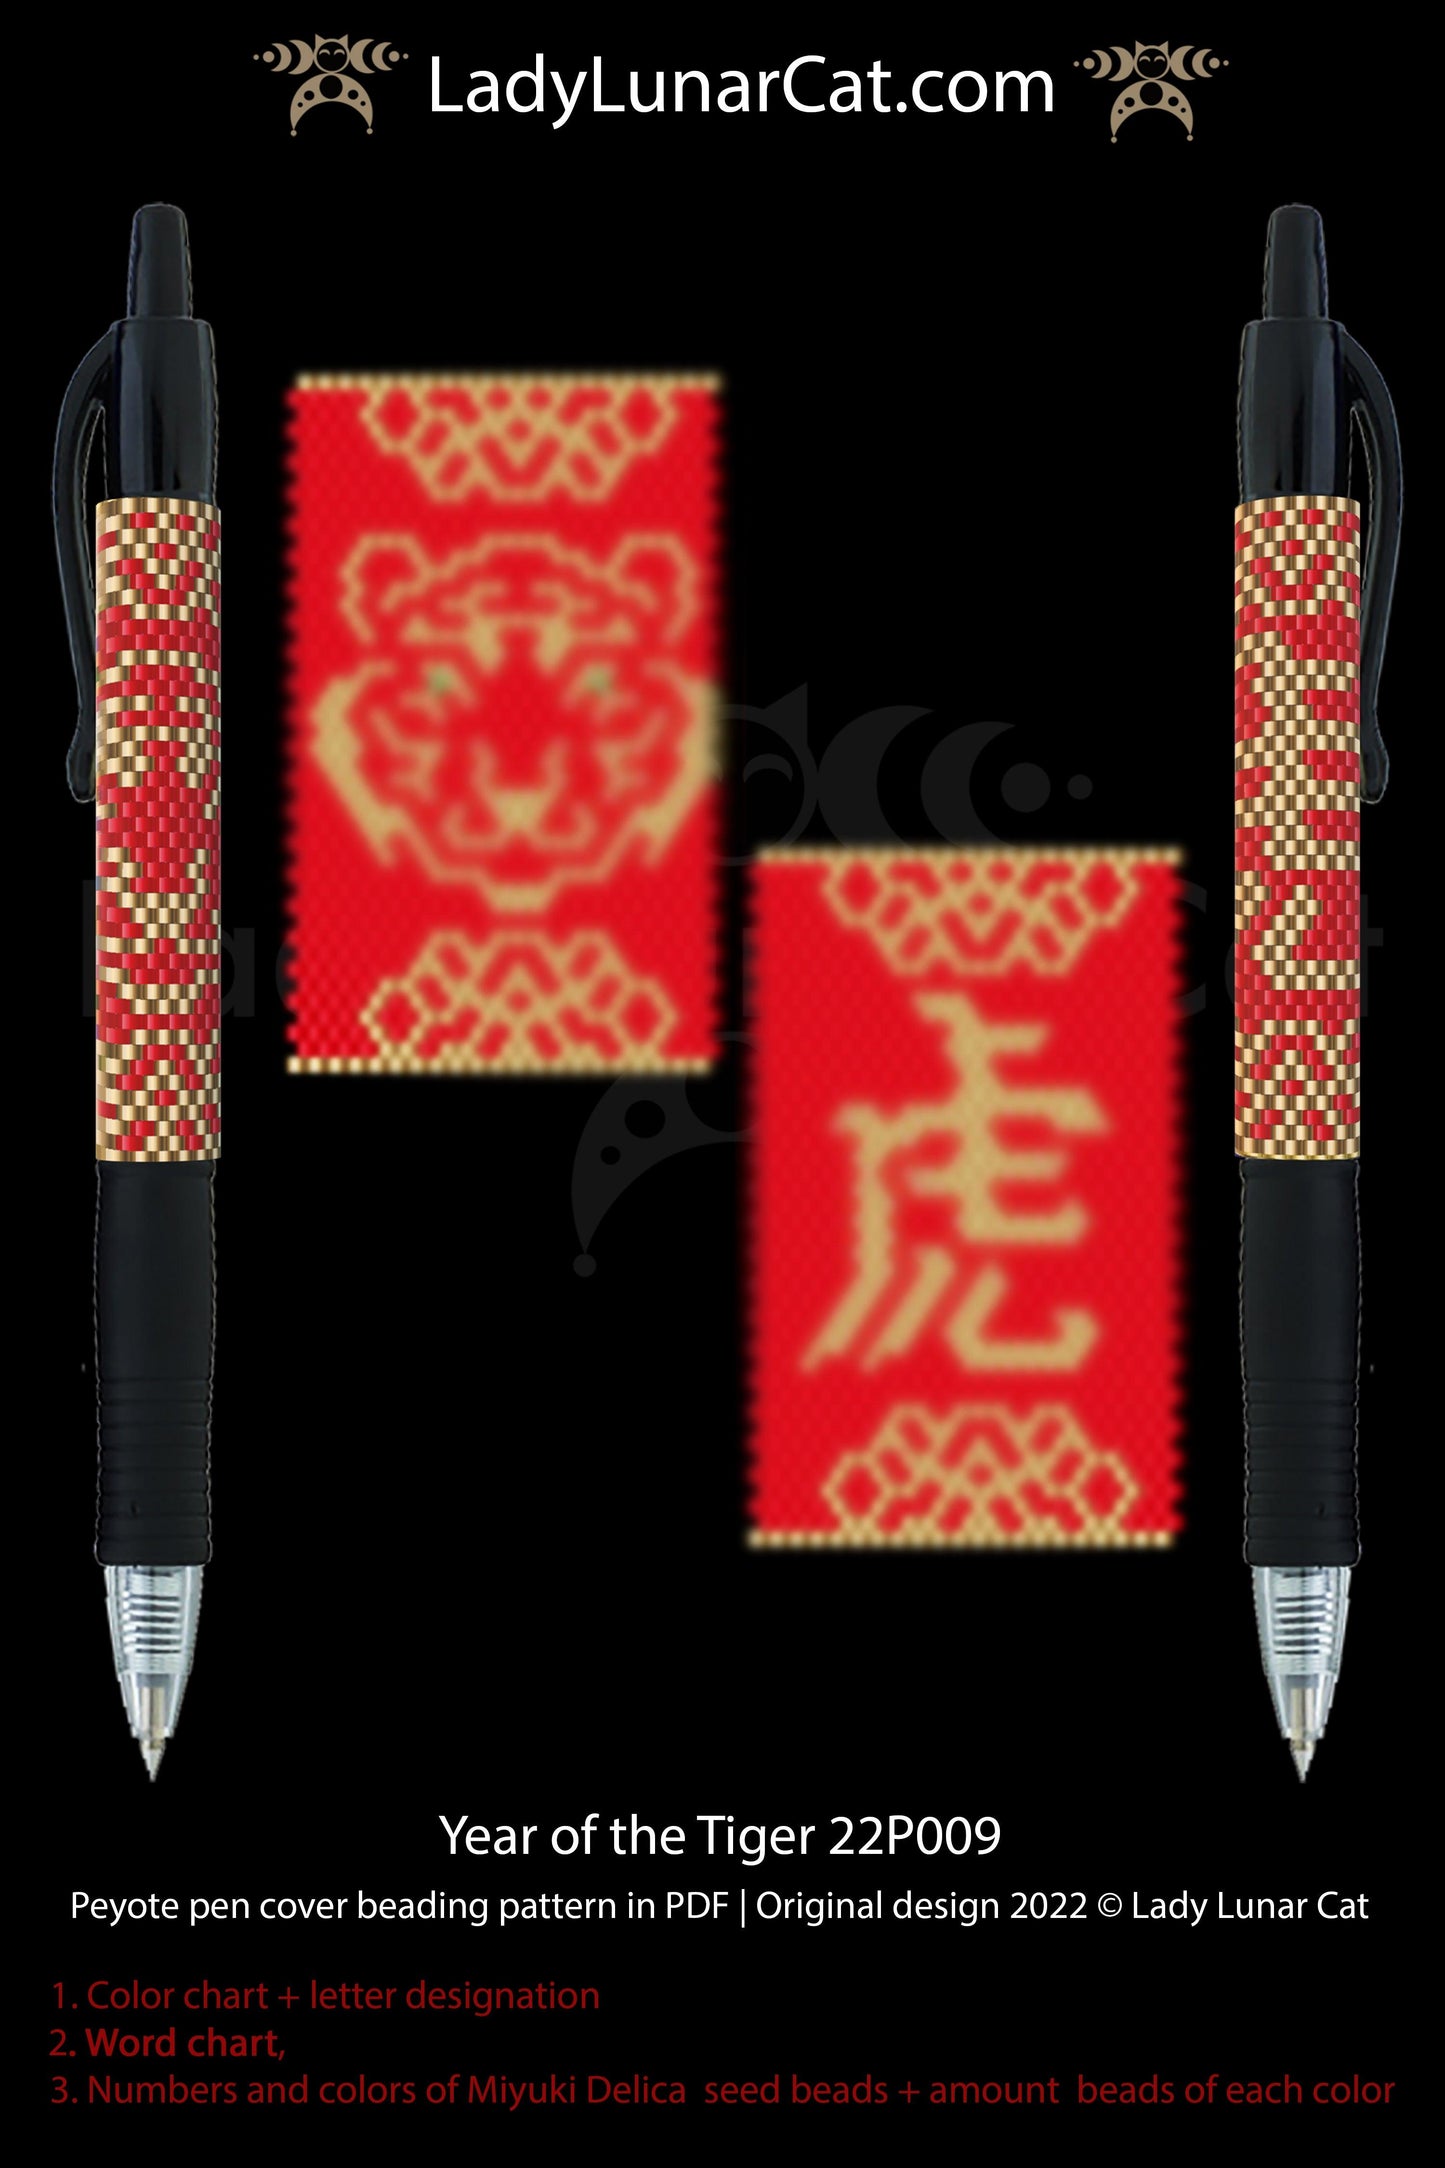 Peyote pen cover pattern for beading Year of the Tiger 22P009 LadyLunarCat